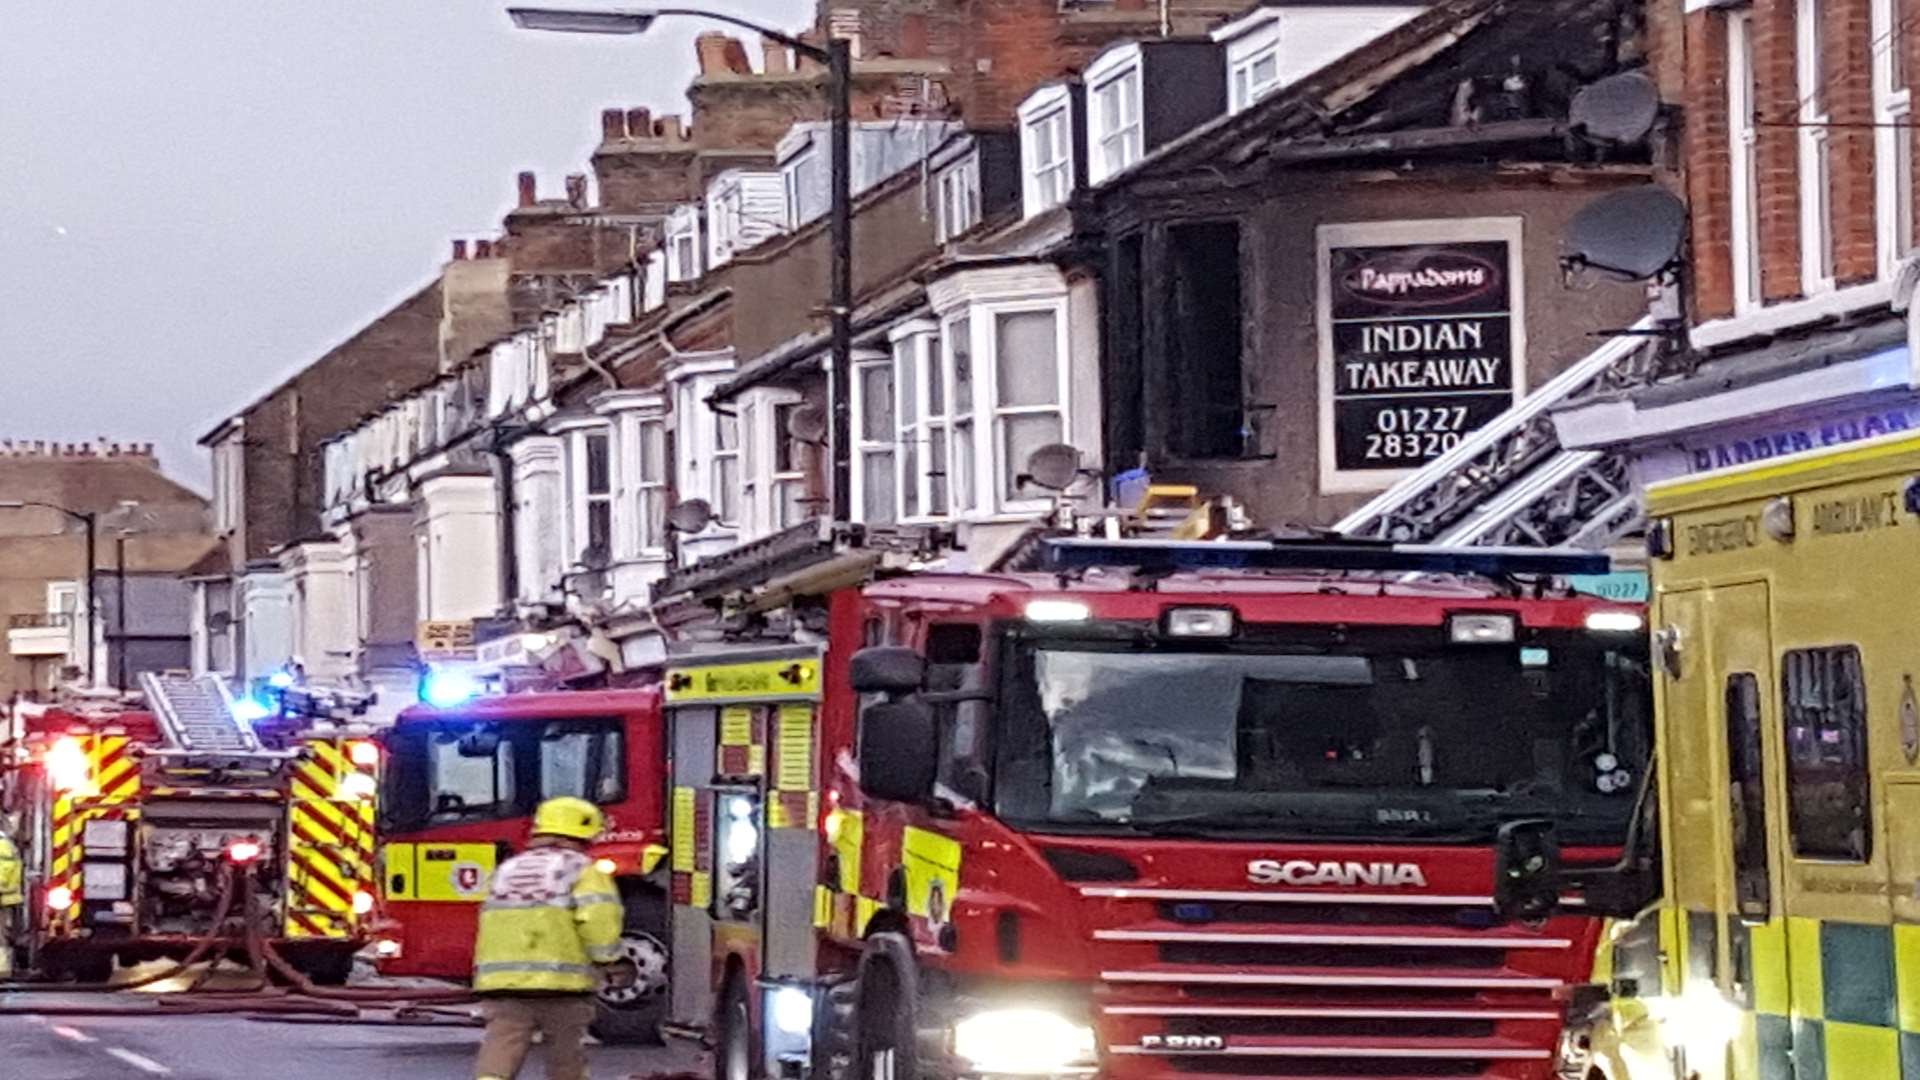 A serious flat fire sparked a huge emergency response